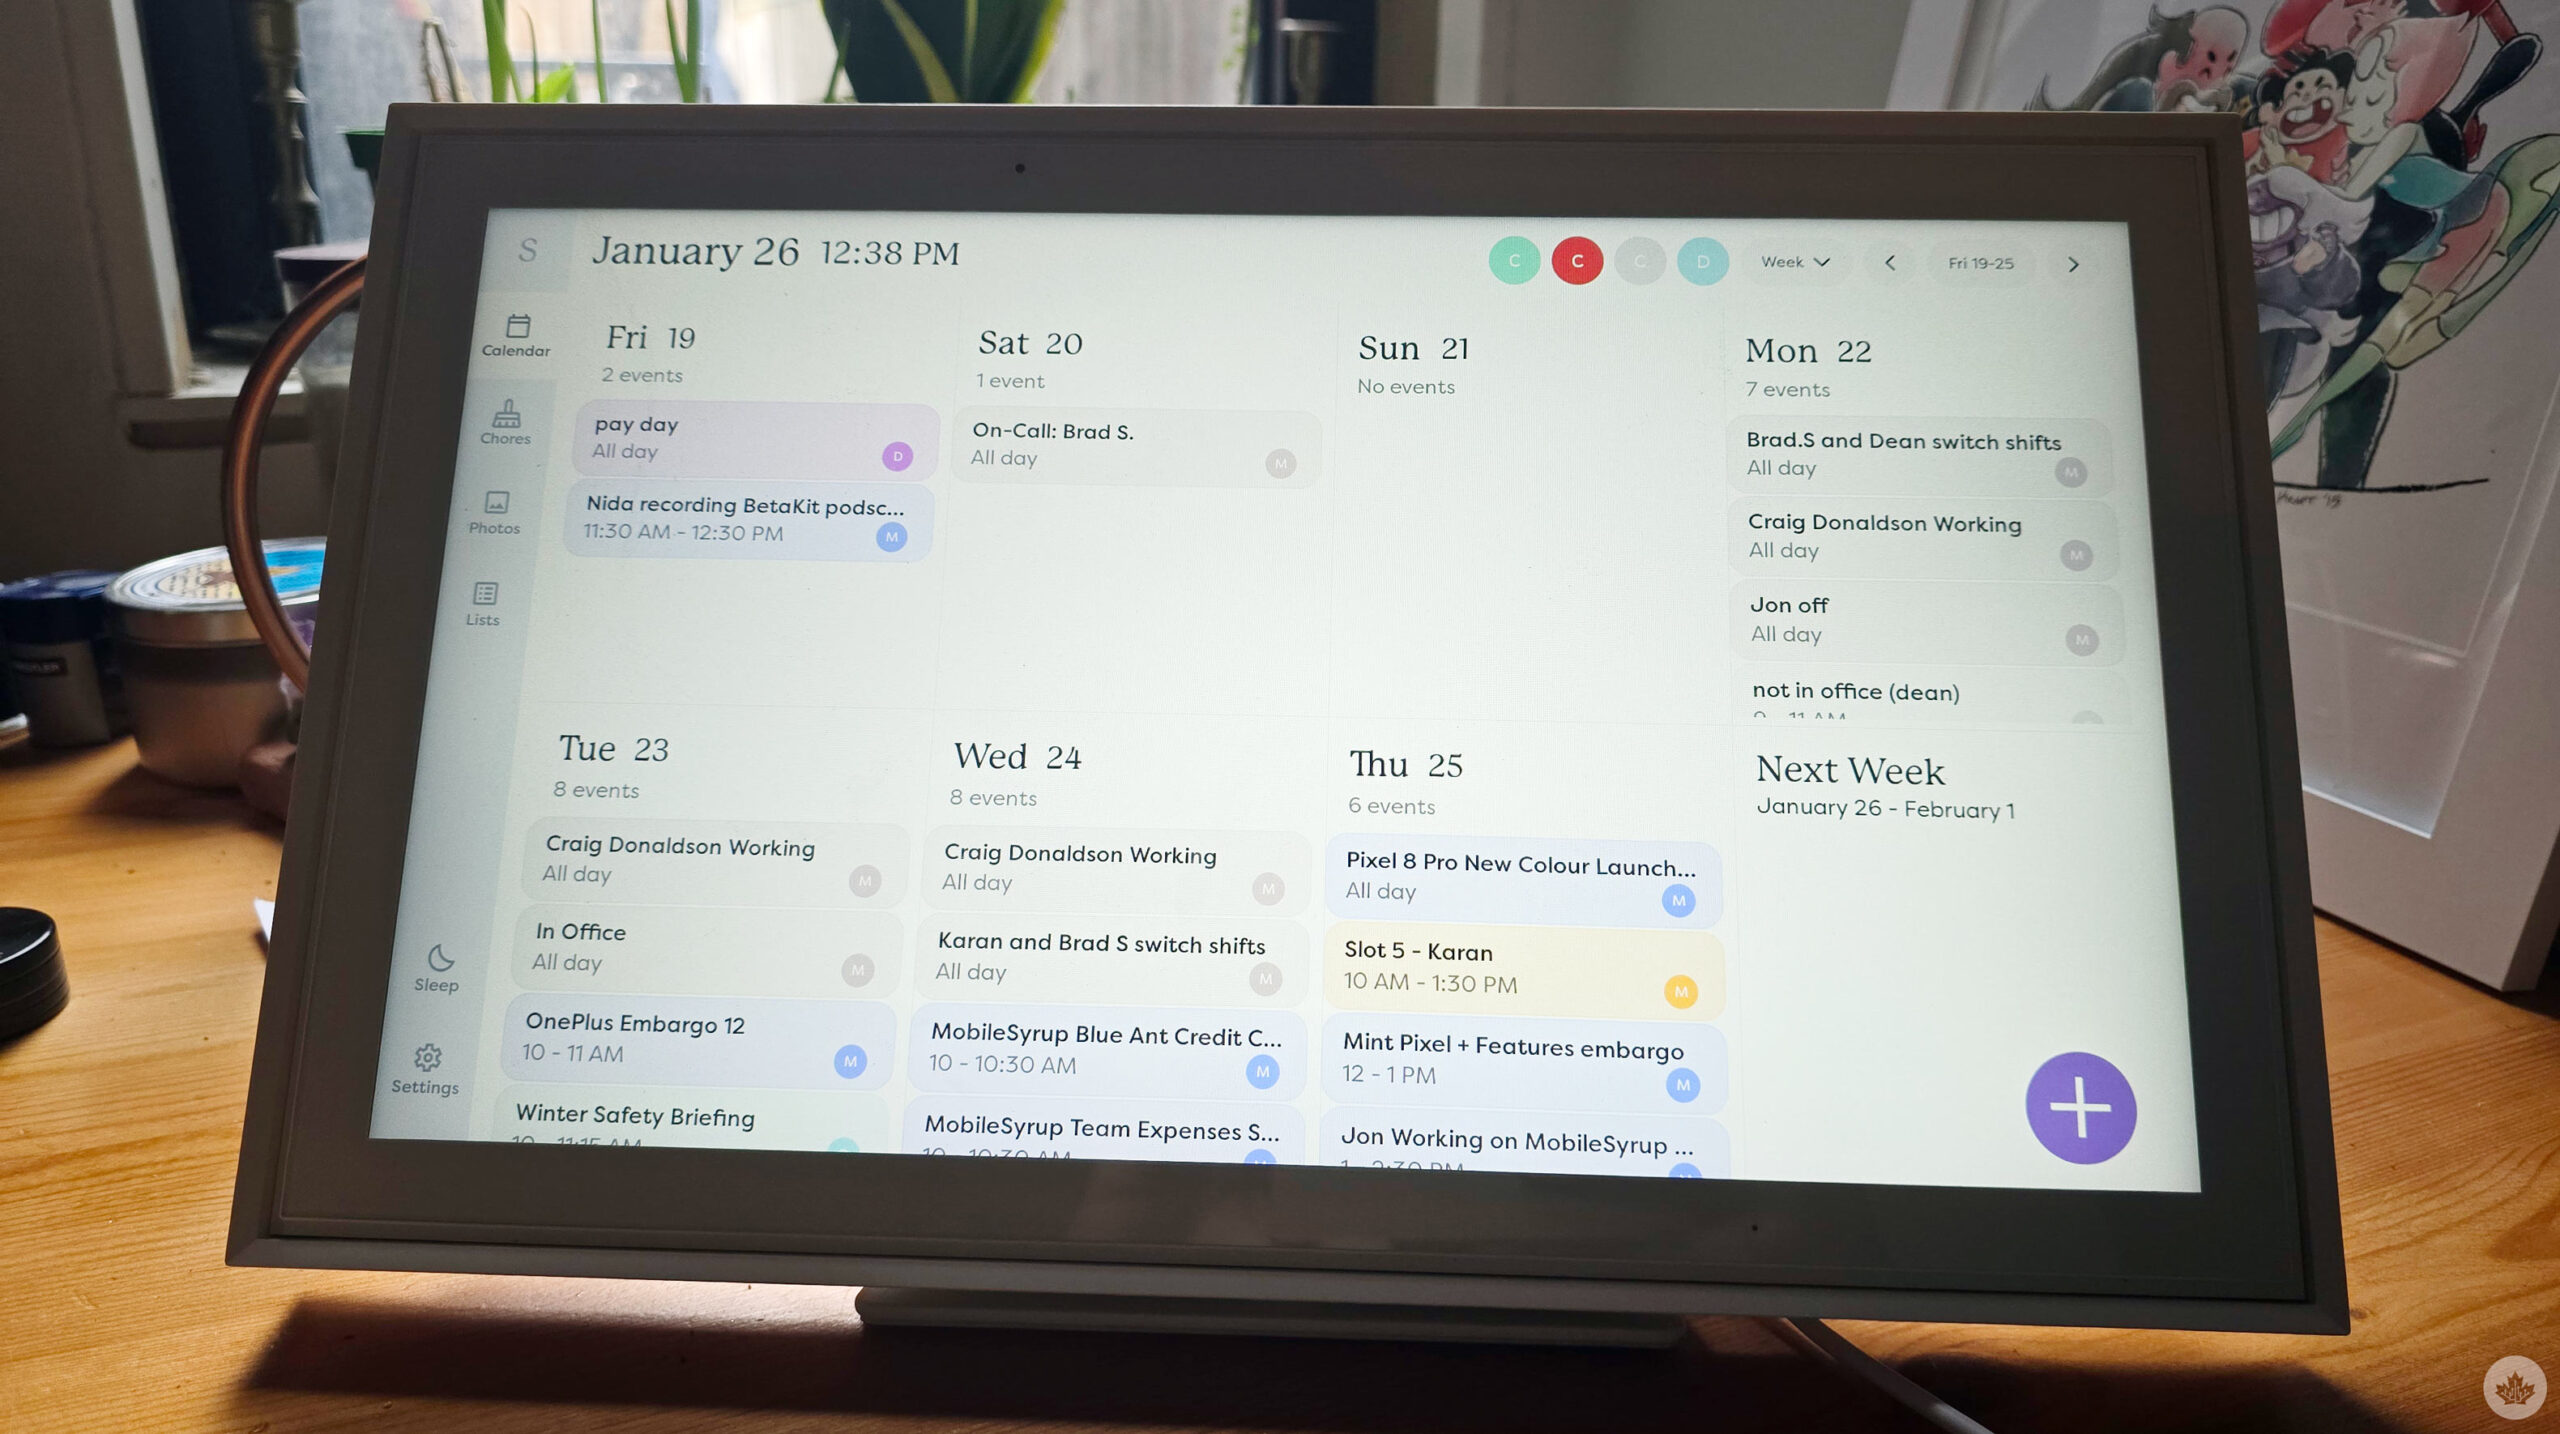 Skylight Calendar is an organization tool that helps me stay on task